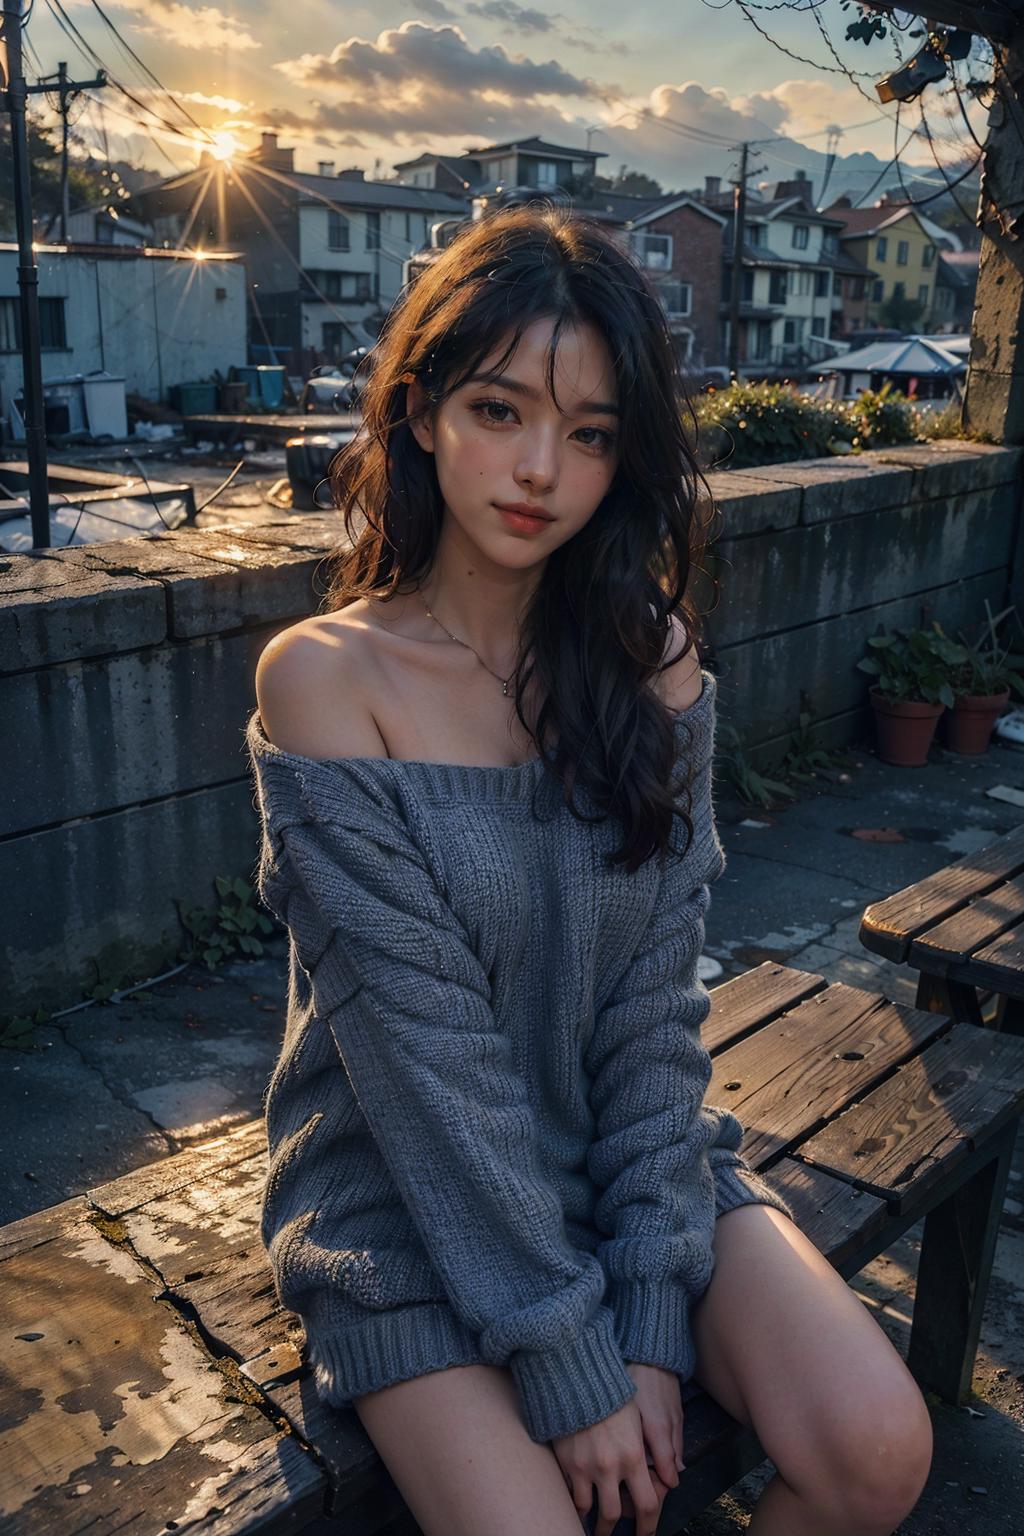 A young woman with a long black sweater posing on a wooden bench.